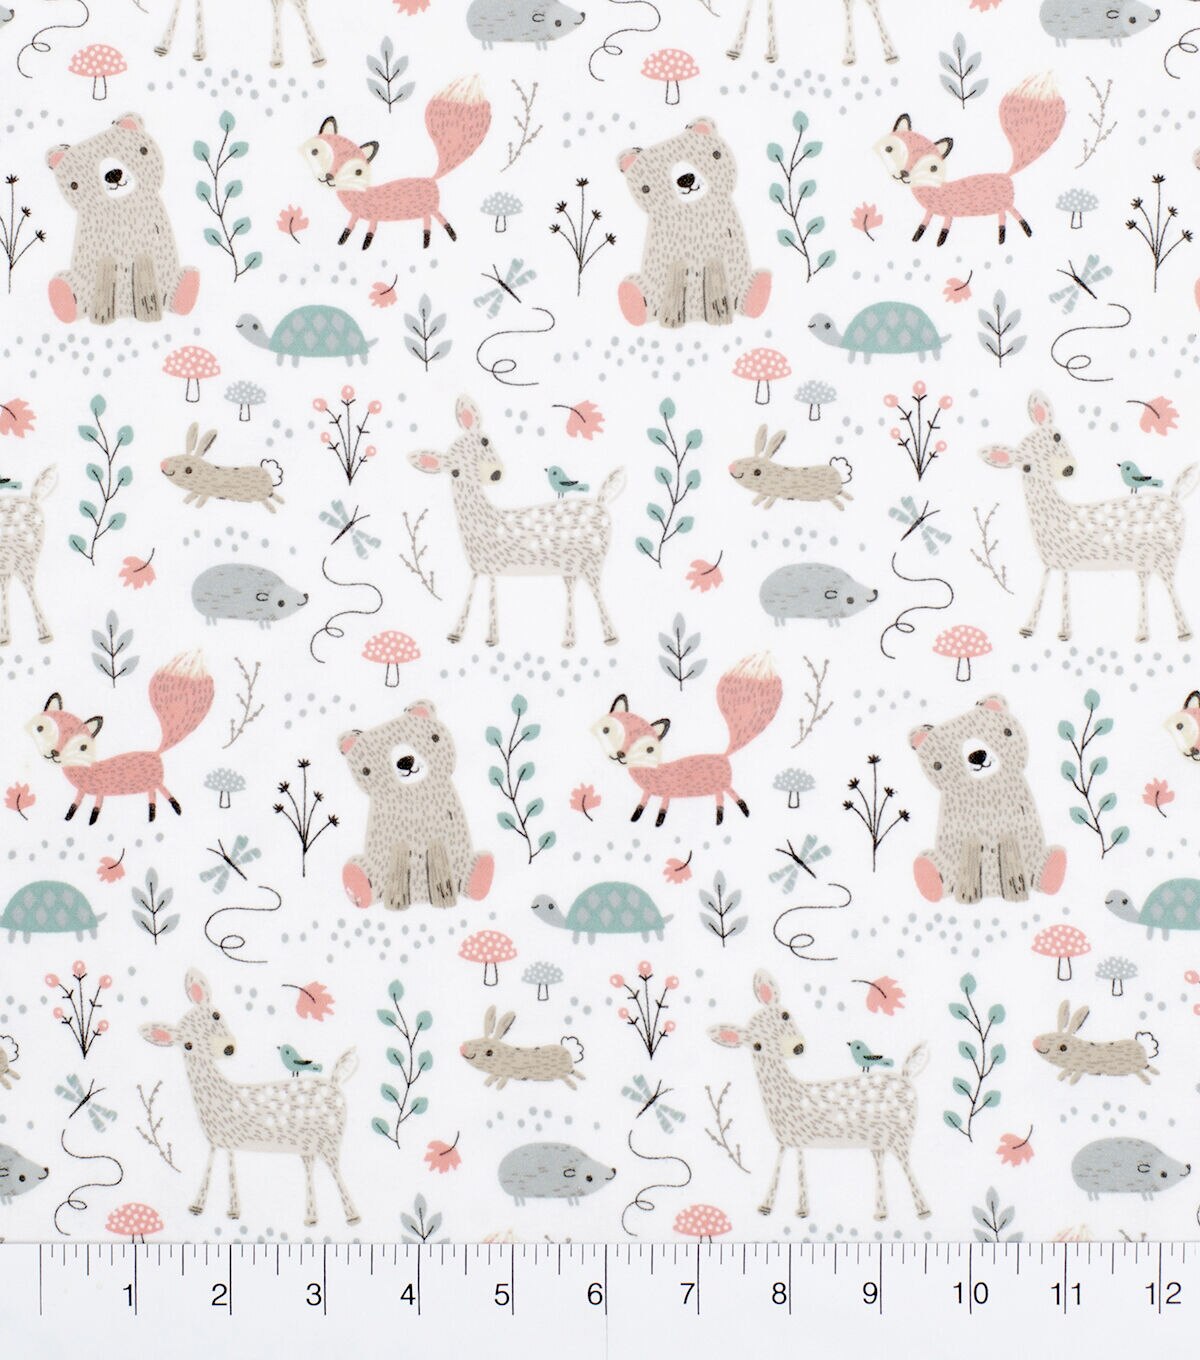 Watercolor Woodland Nursery Cotton Fabric By The Yard With Spoonflower Woodland Creatures Fabric Woodland Creatures White By Vinpauld